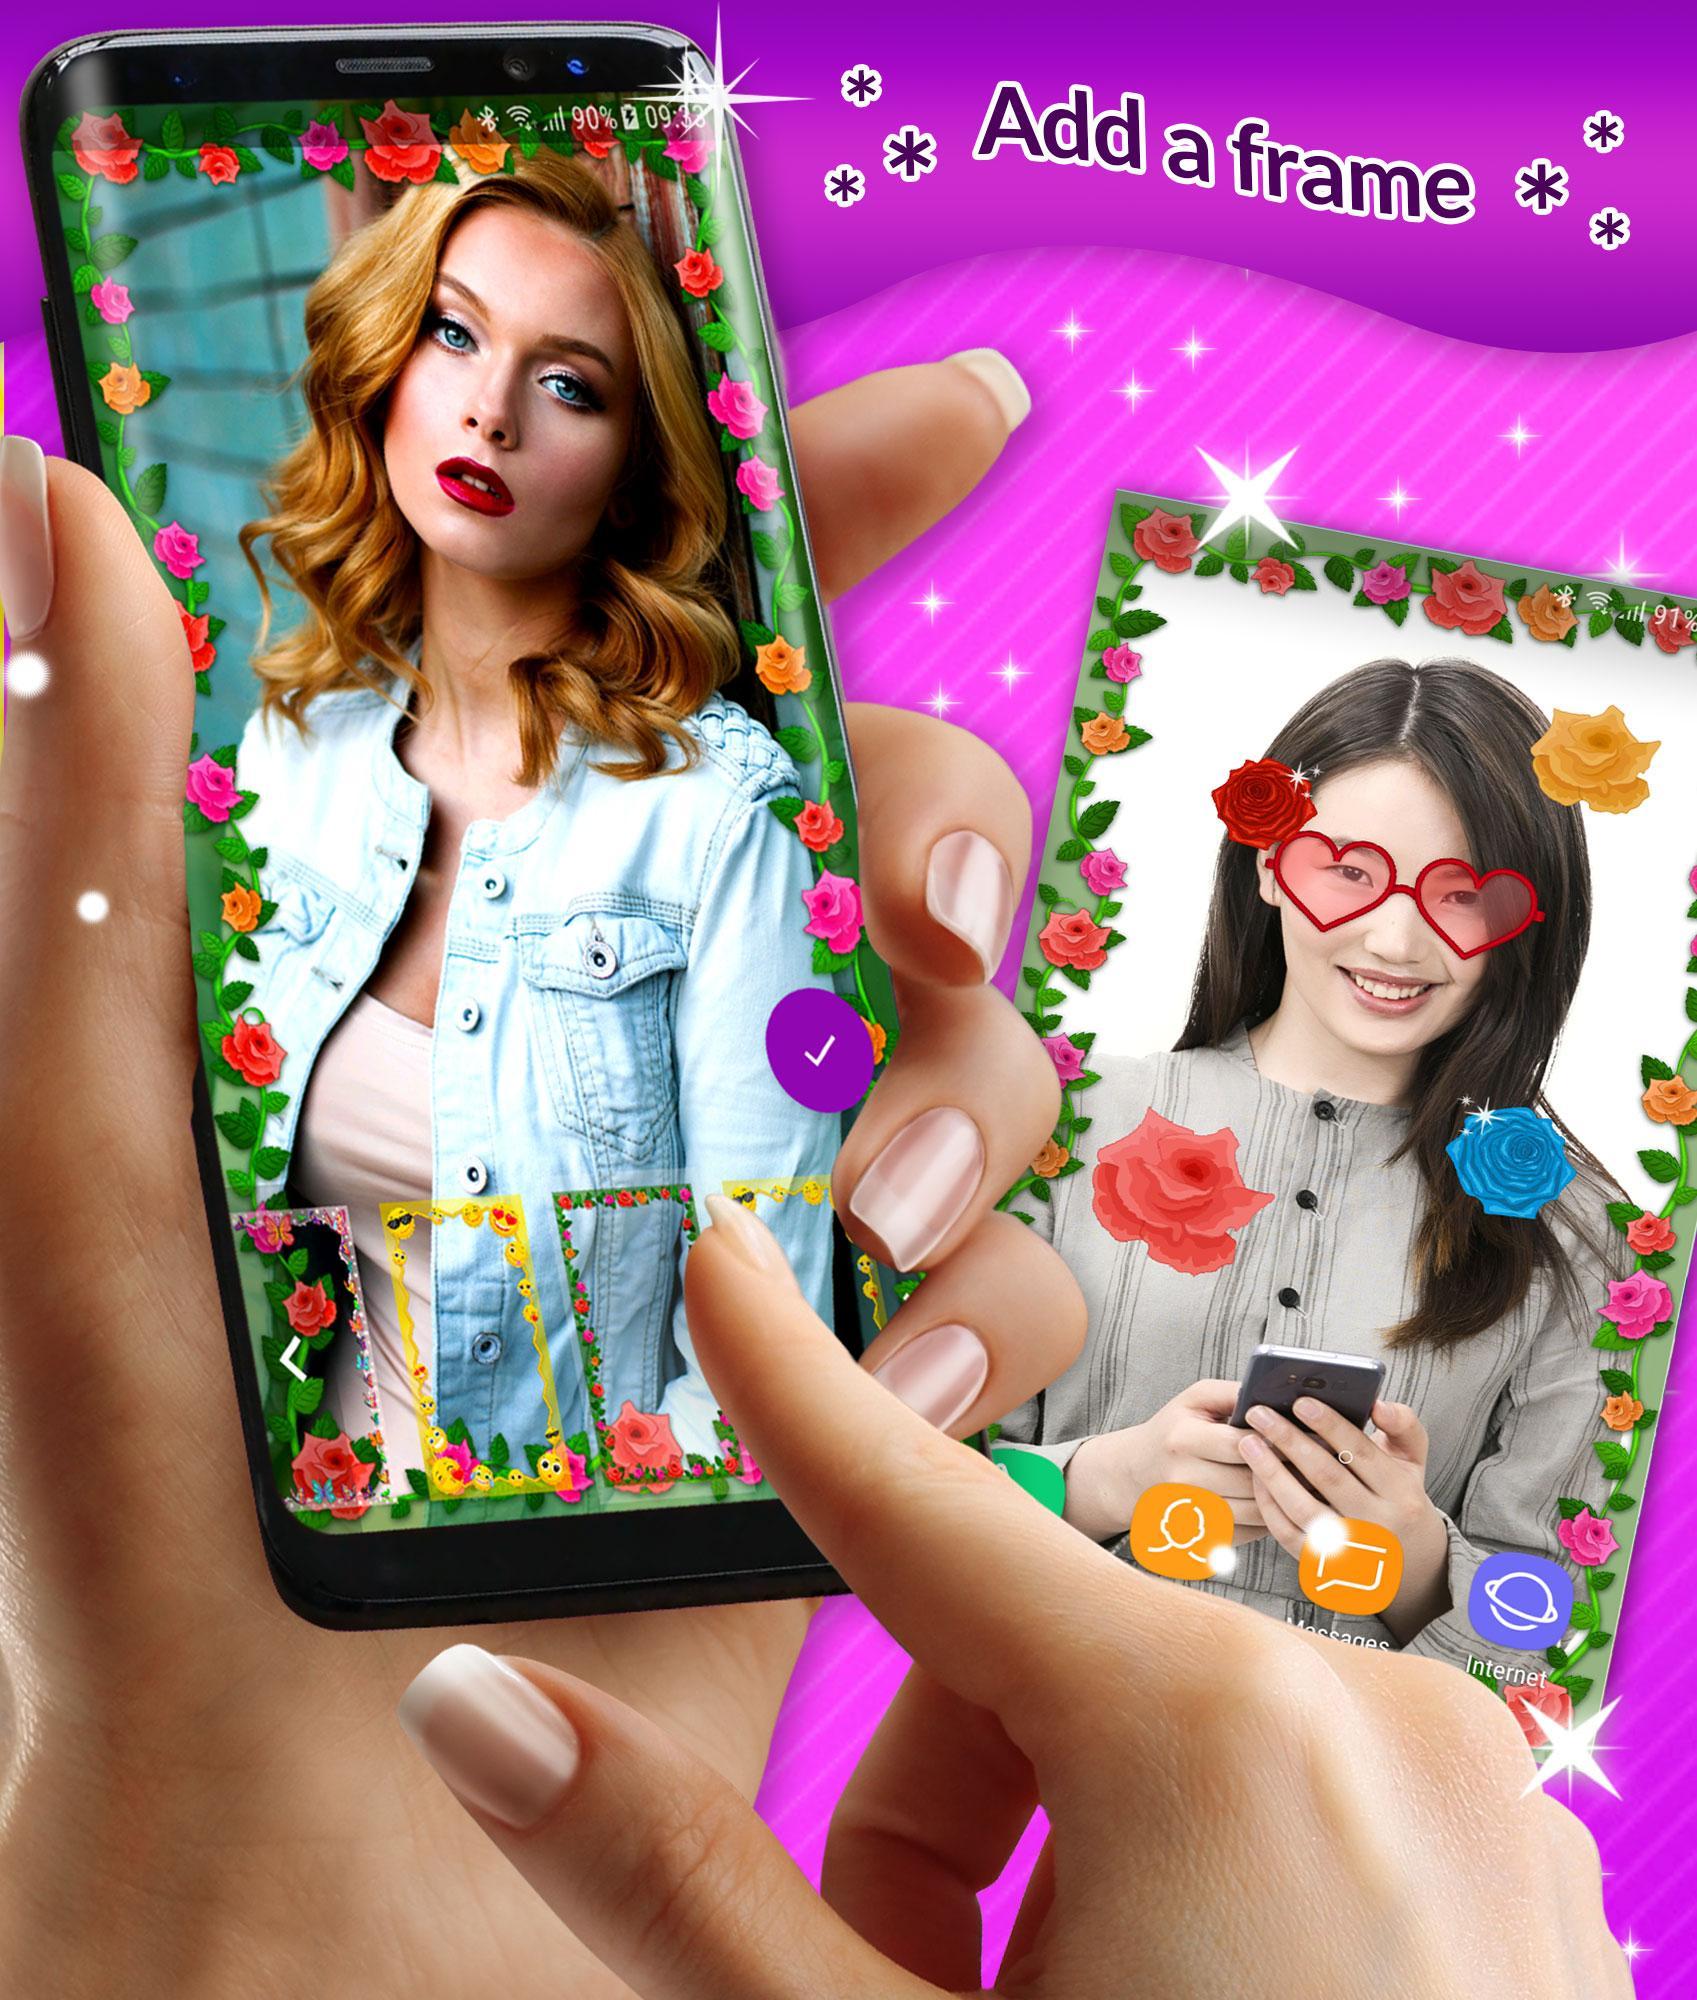 Sticka-Frame - Roses Frames & Stickers ✨ for Android - APK Download